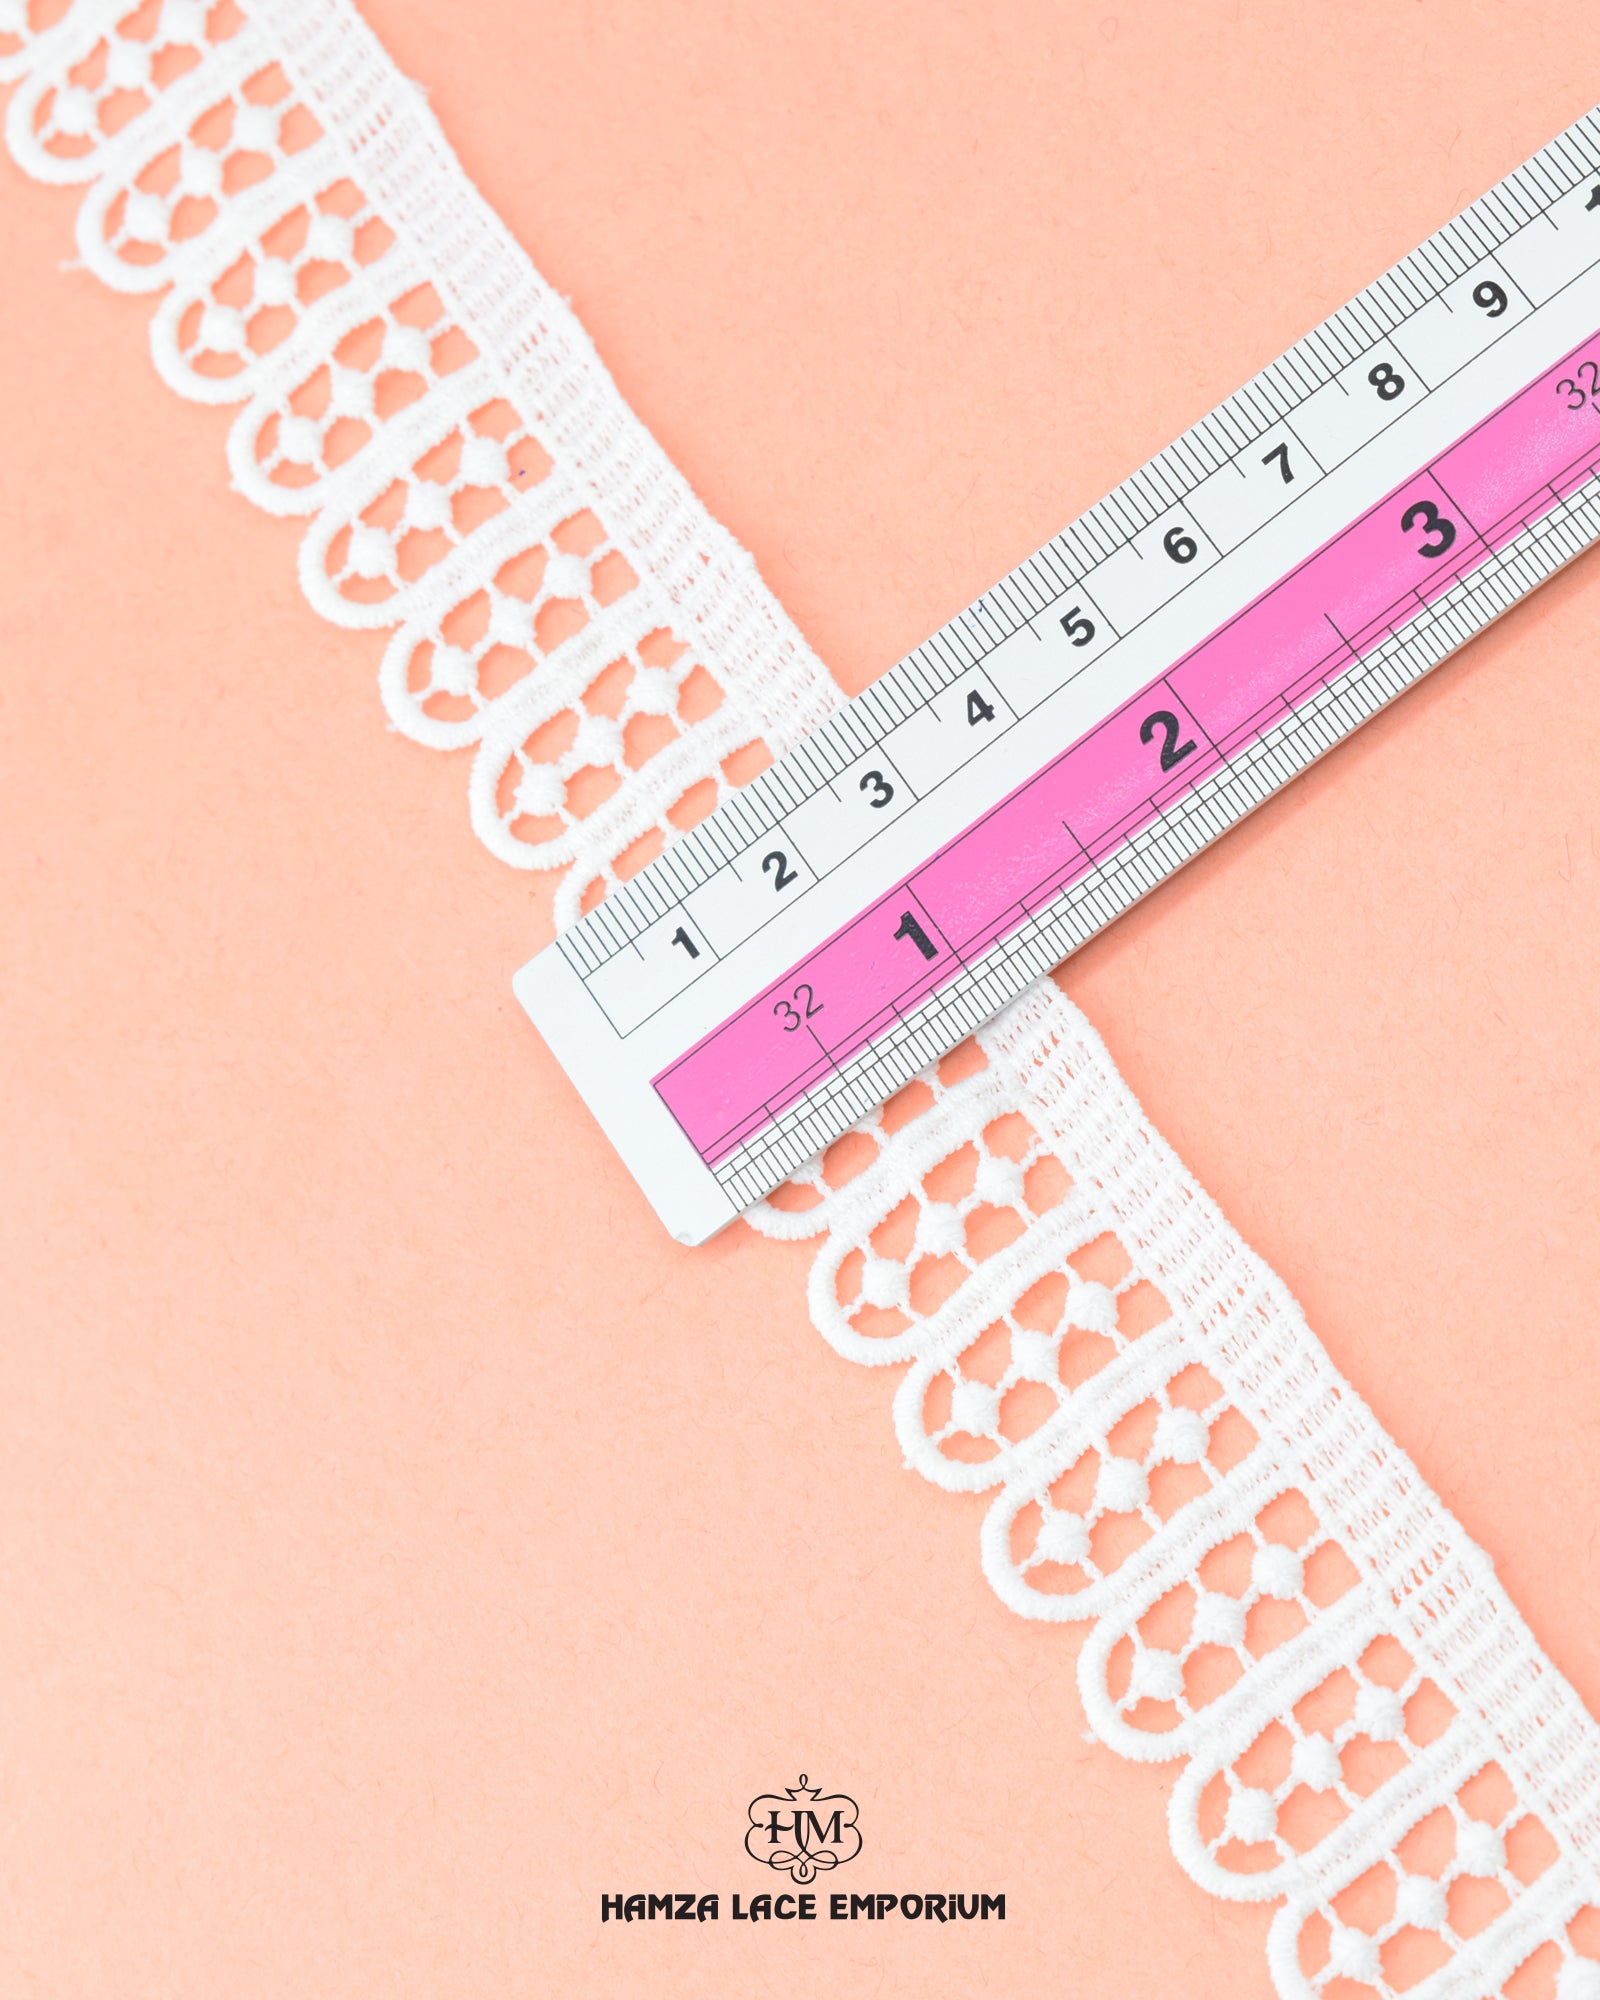 Size of the 'Edging Long Loop Lace 6193' is shown as '1.25' inches with the help of a ruler